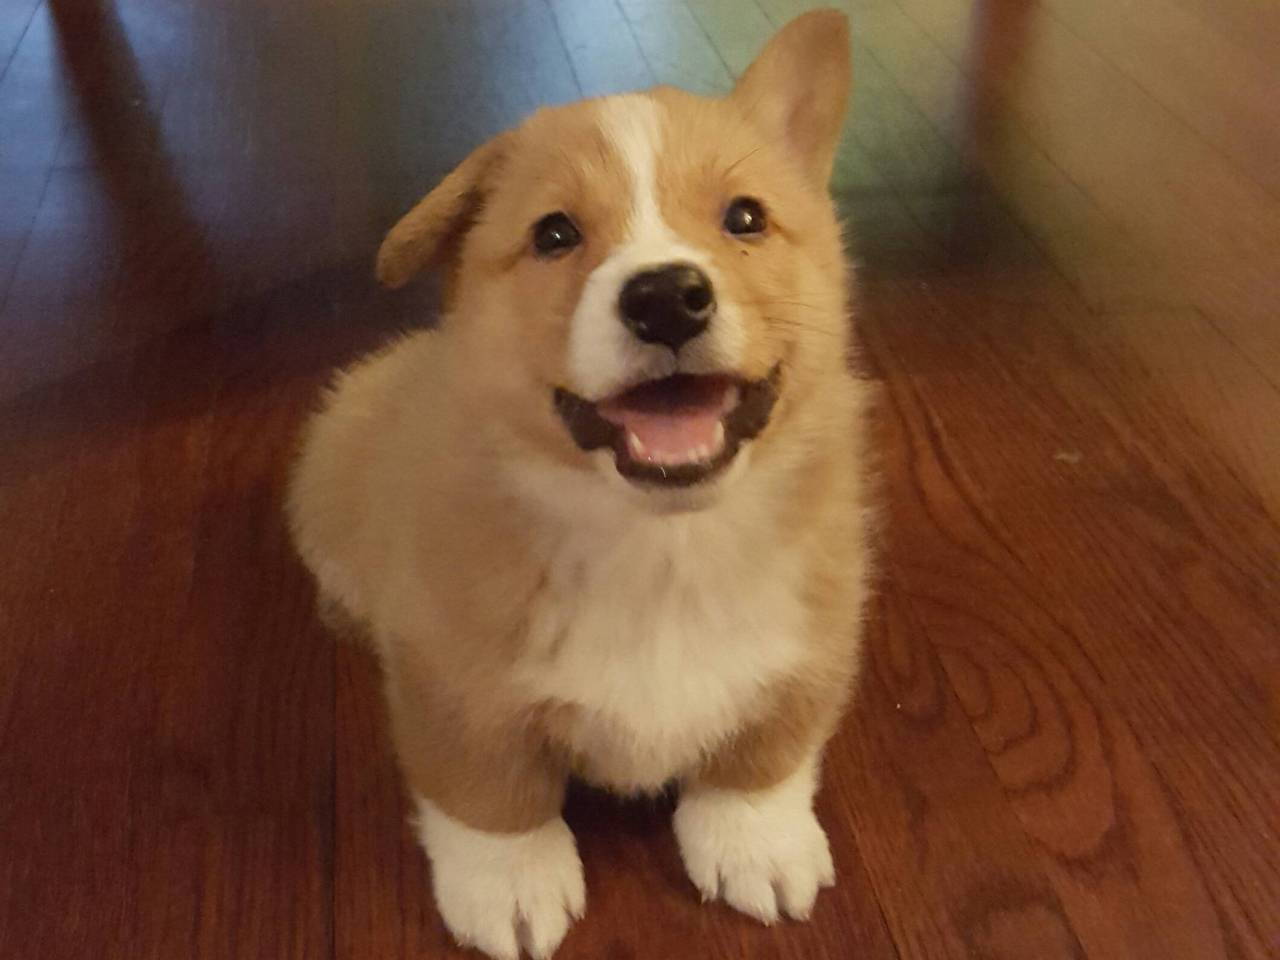 This is Theodore the morning after I picked him up. He’s a good boy. (Source: http://ift.tt/2ilSSMT)